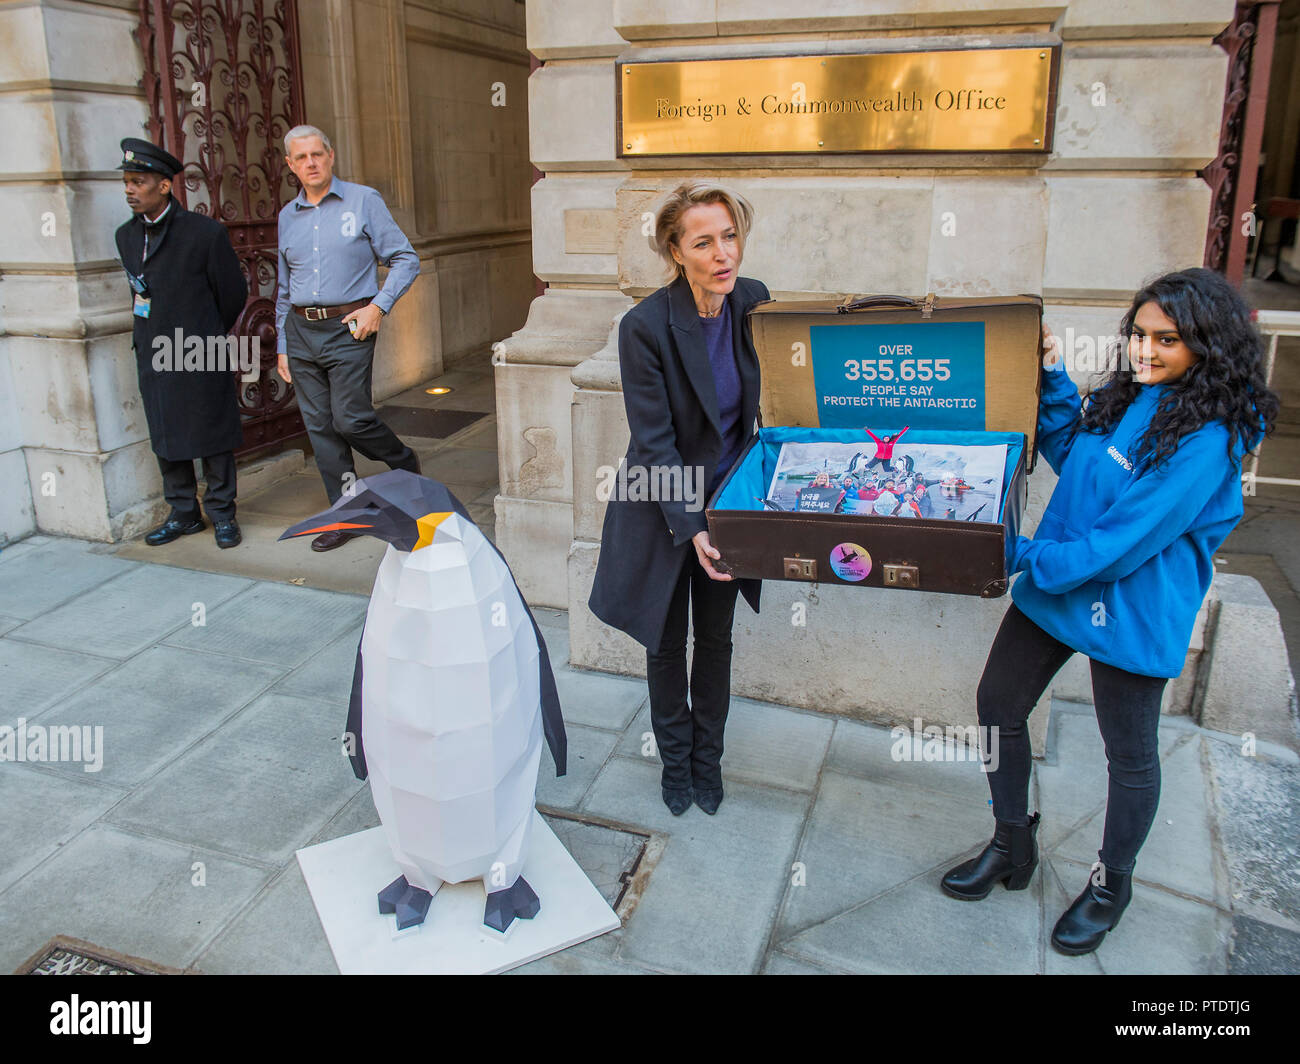 London, UK. 9th October, 2018. Gillian Anderson (pictured) arrives with the 350k signature petition in a well-travelled suitcase - as a Greenpeace Antarctic Ambassador she visits the Foreign & Commonwealth Office to deliver a petition calling for the creation of the largest protected area on Earth – a 1.8 million square kilometre Antarctic Ocean Sanctuary. Credit: Guy Bell/Alamy Live News Stock Photo